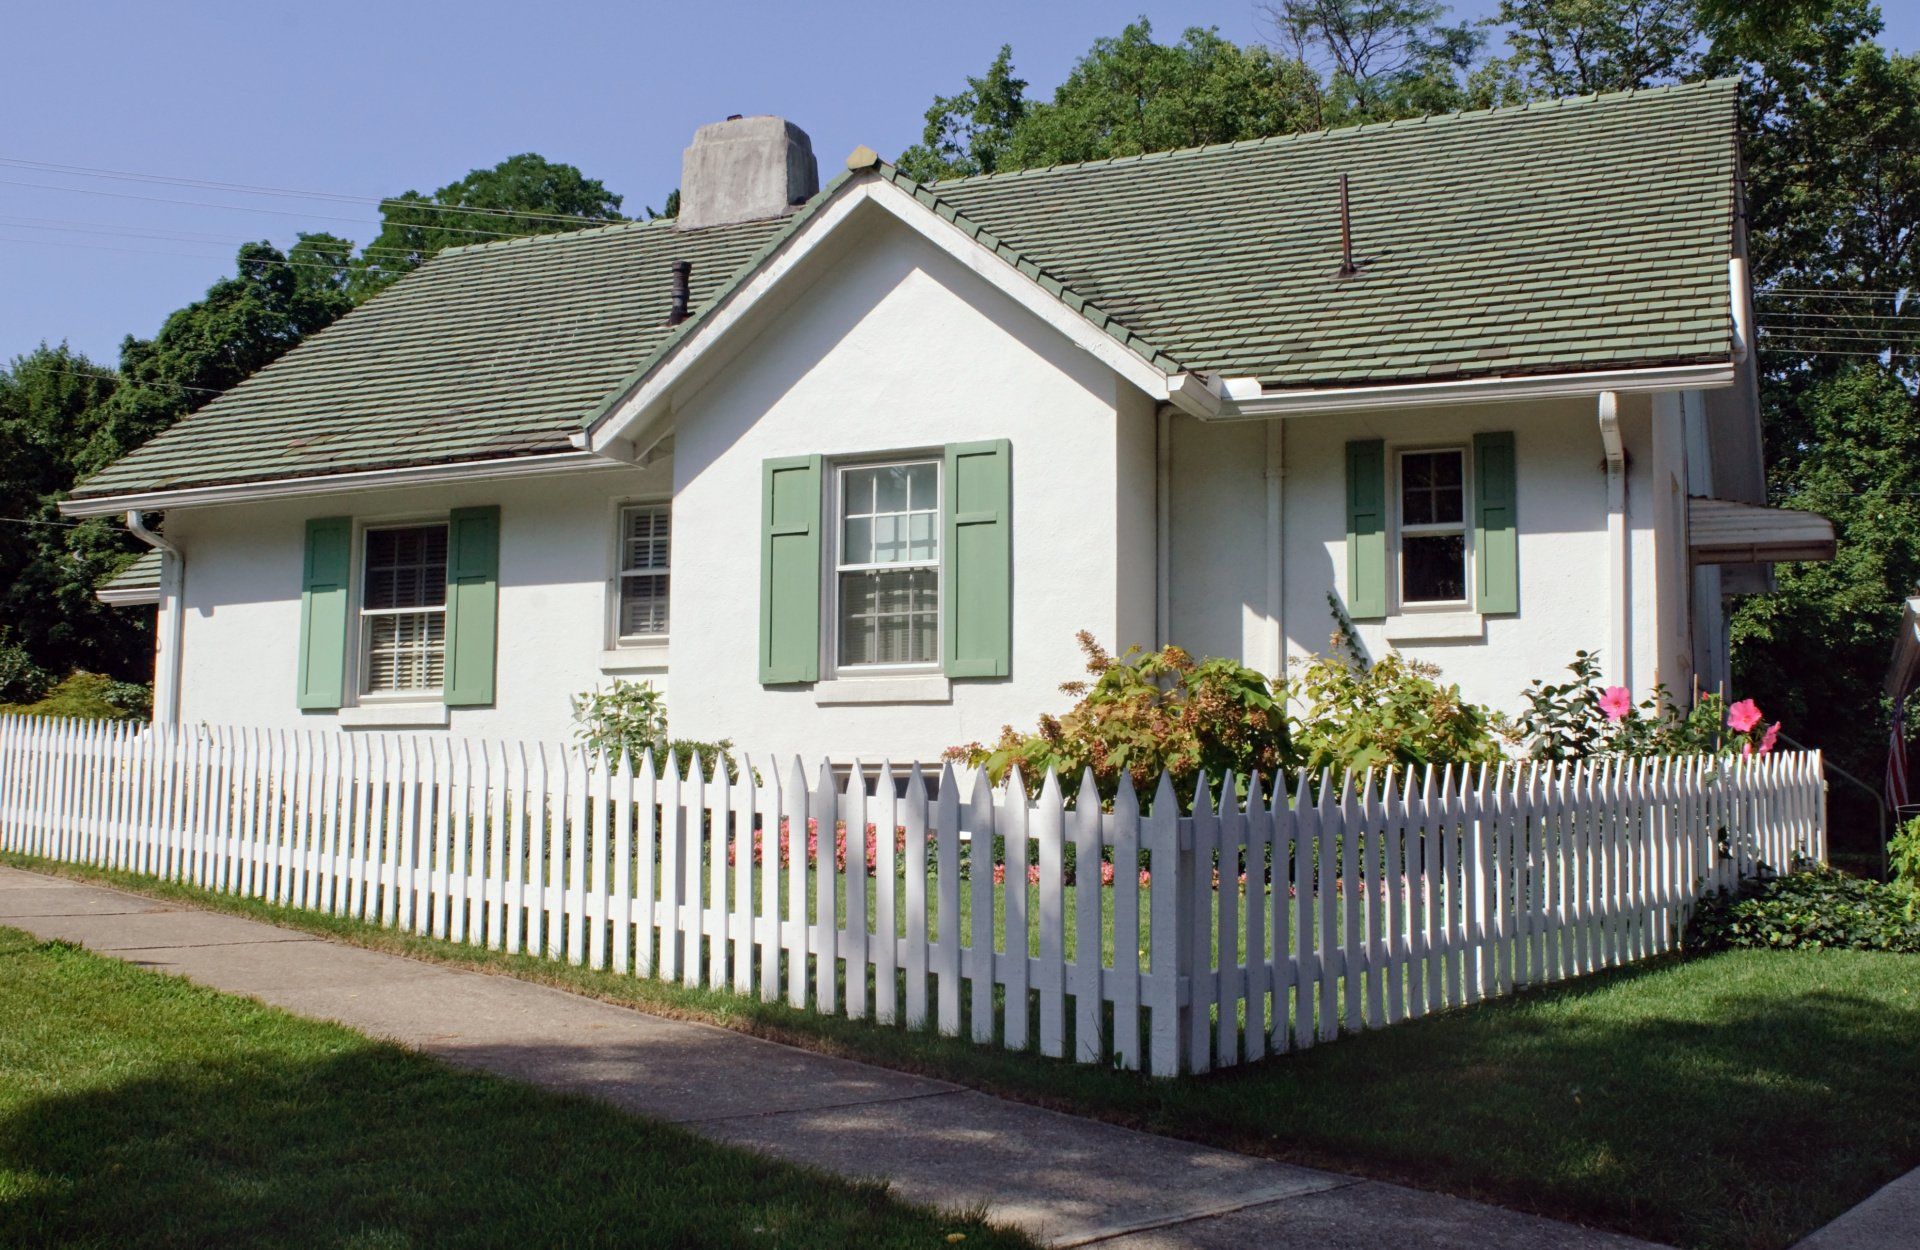 A white picket fence in the front yard of a white cottage